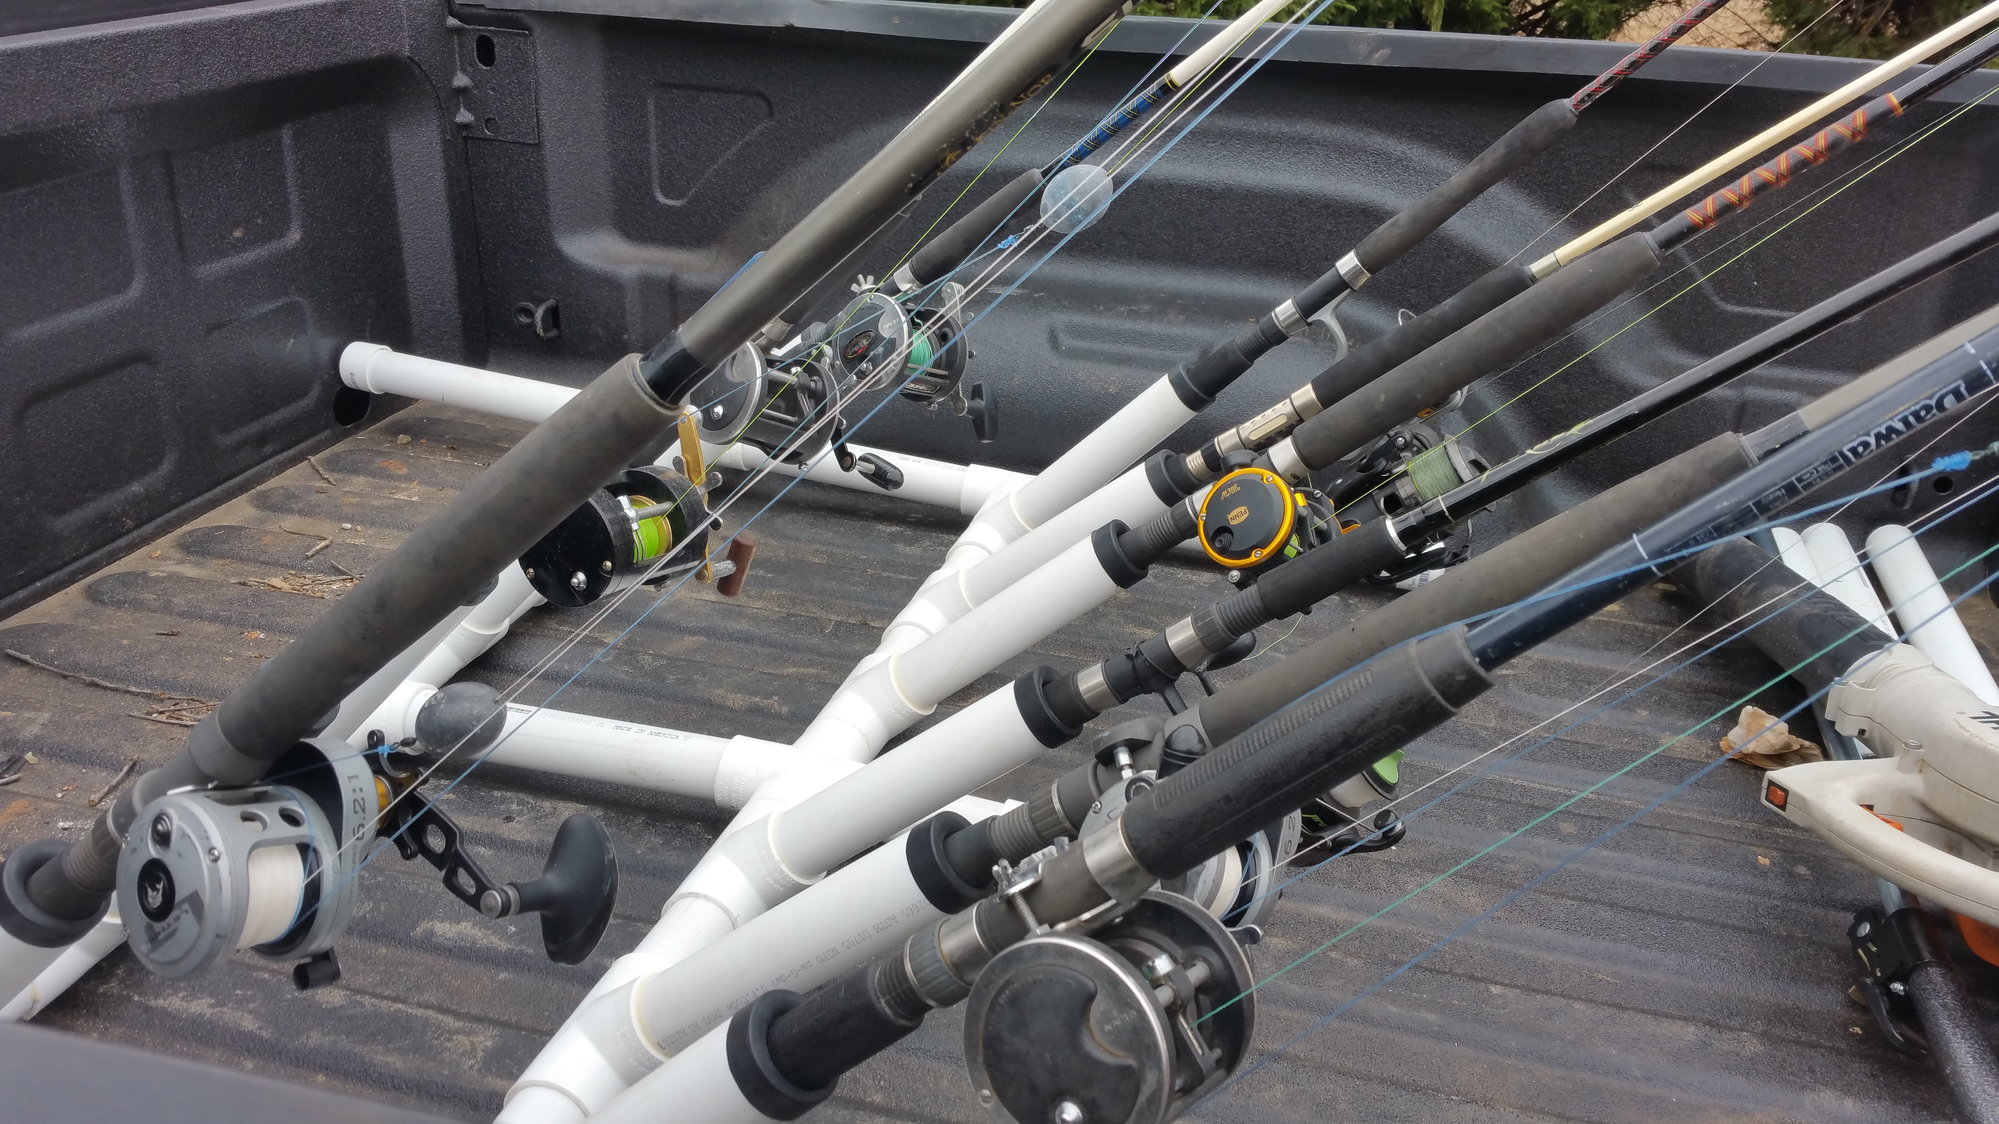 Truck bed rod holder setups - Page 2 - The Hull Truth - Boating